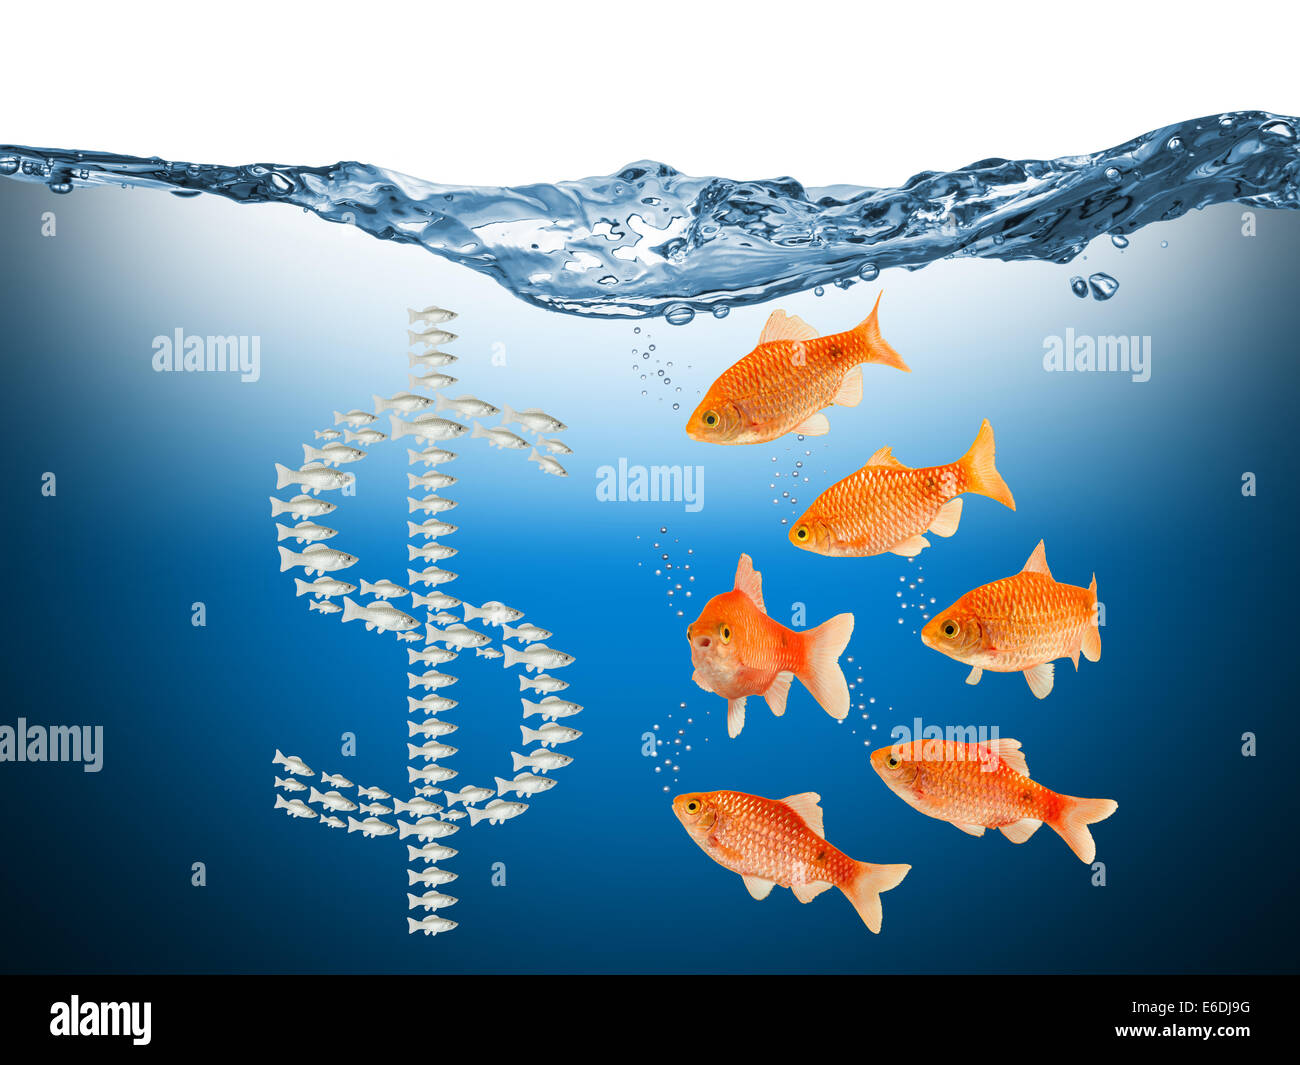 fish speculation concept with dollar symbol Stock Photo